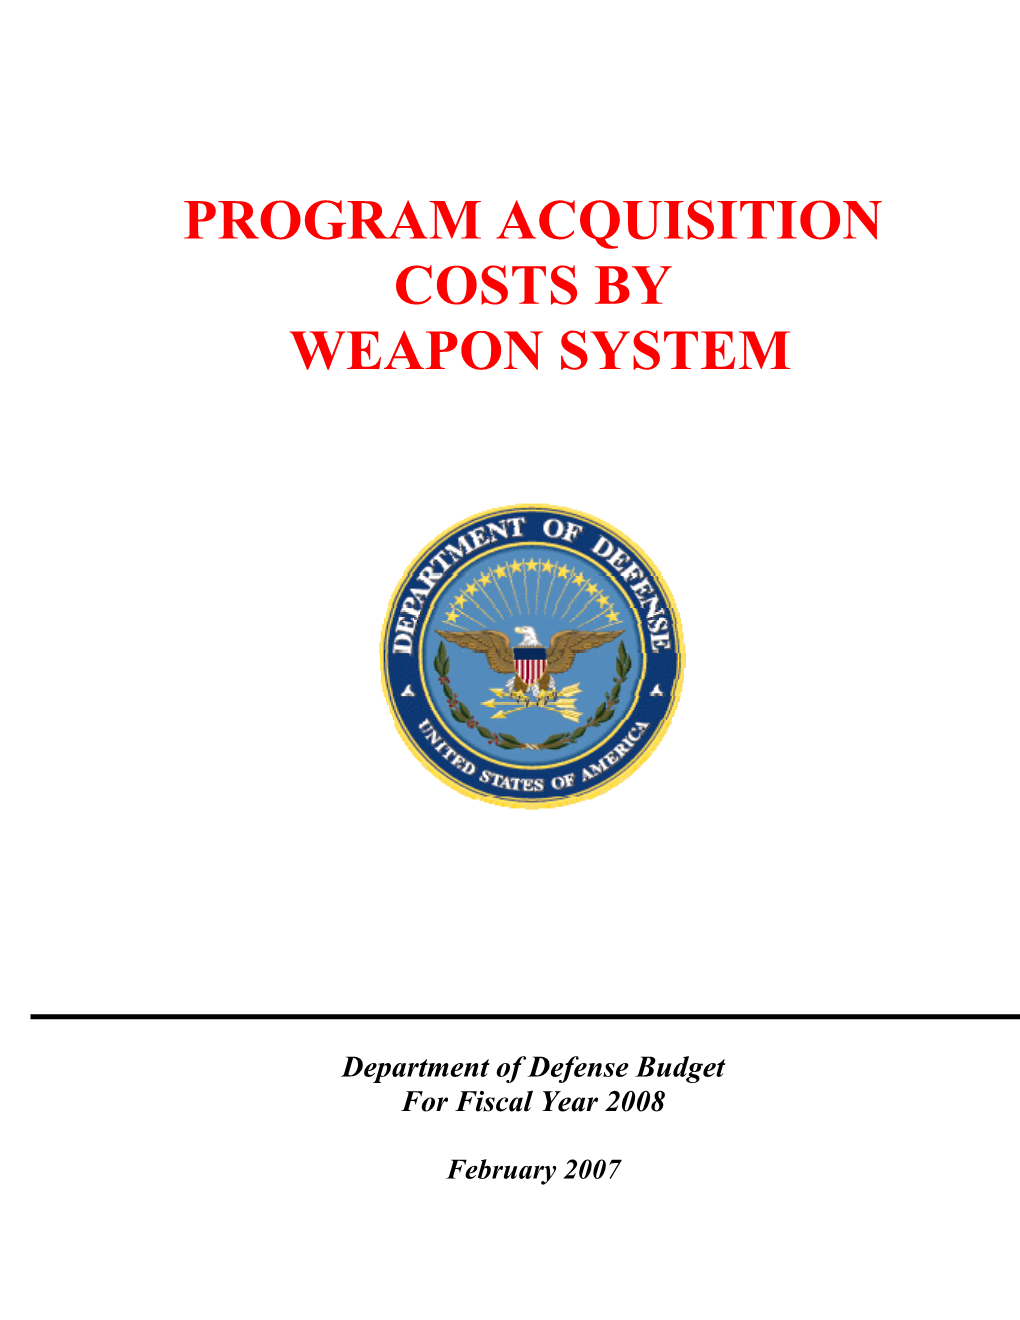 Program Acquisition Costs by Weapon System